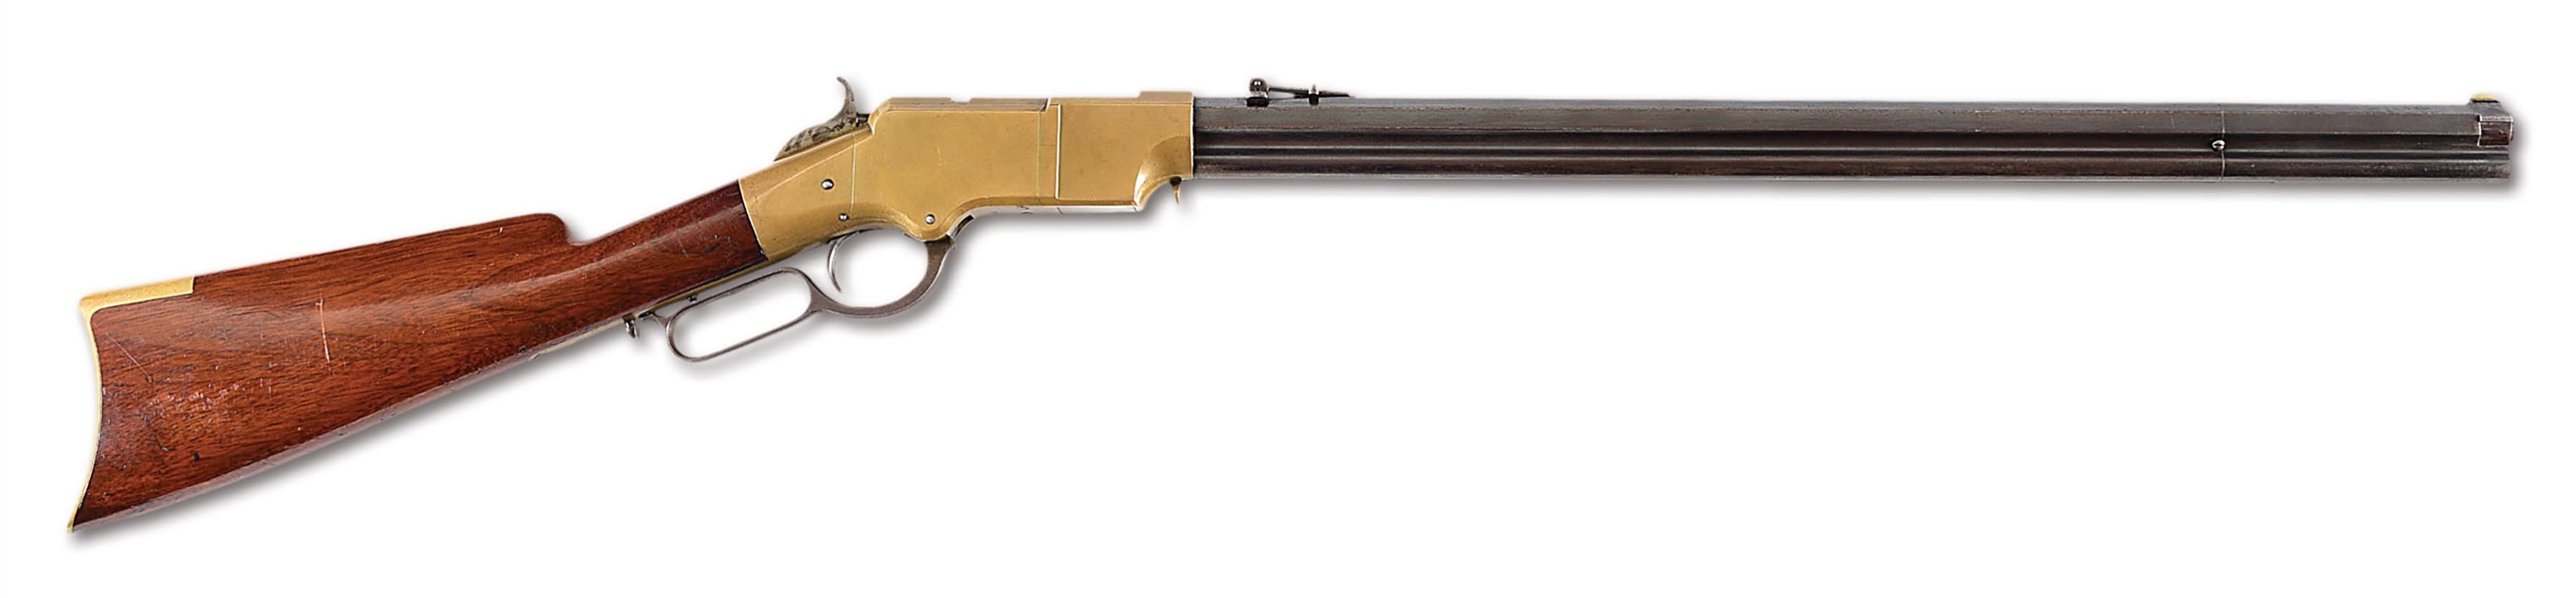 (A) OUTSTANDING EARLY NEW HAVEN ARMS MODEL 1860 HENRY LEVER ACTION RIFLE.